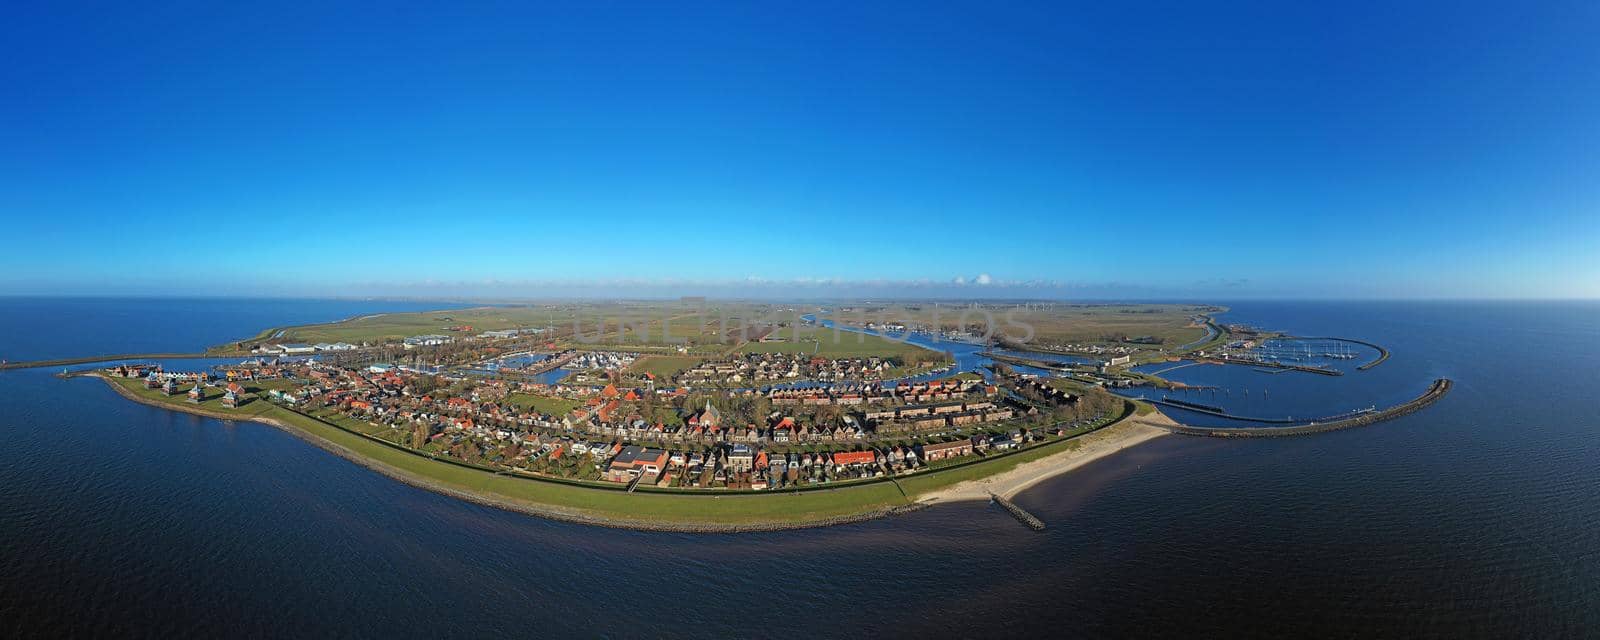 Aerial panorama from the traditional town Stavoren in the Netherlands